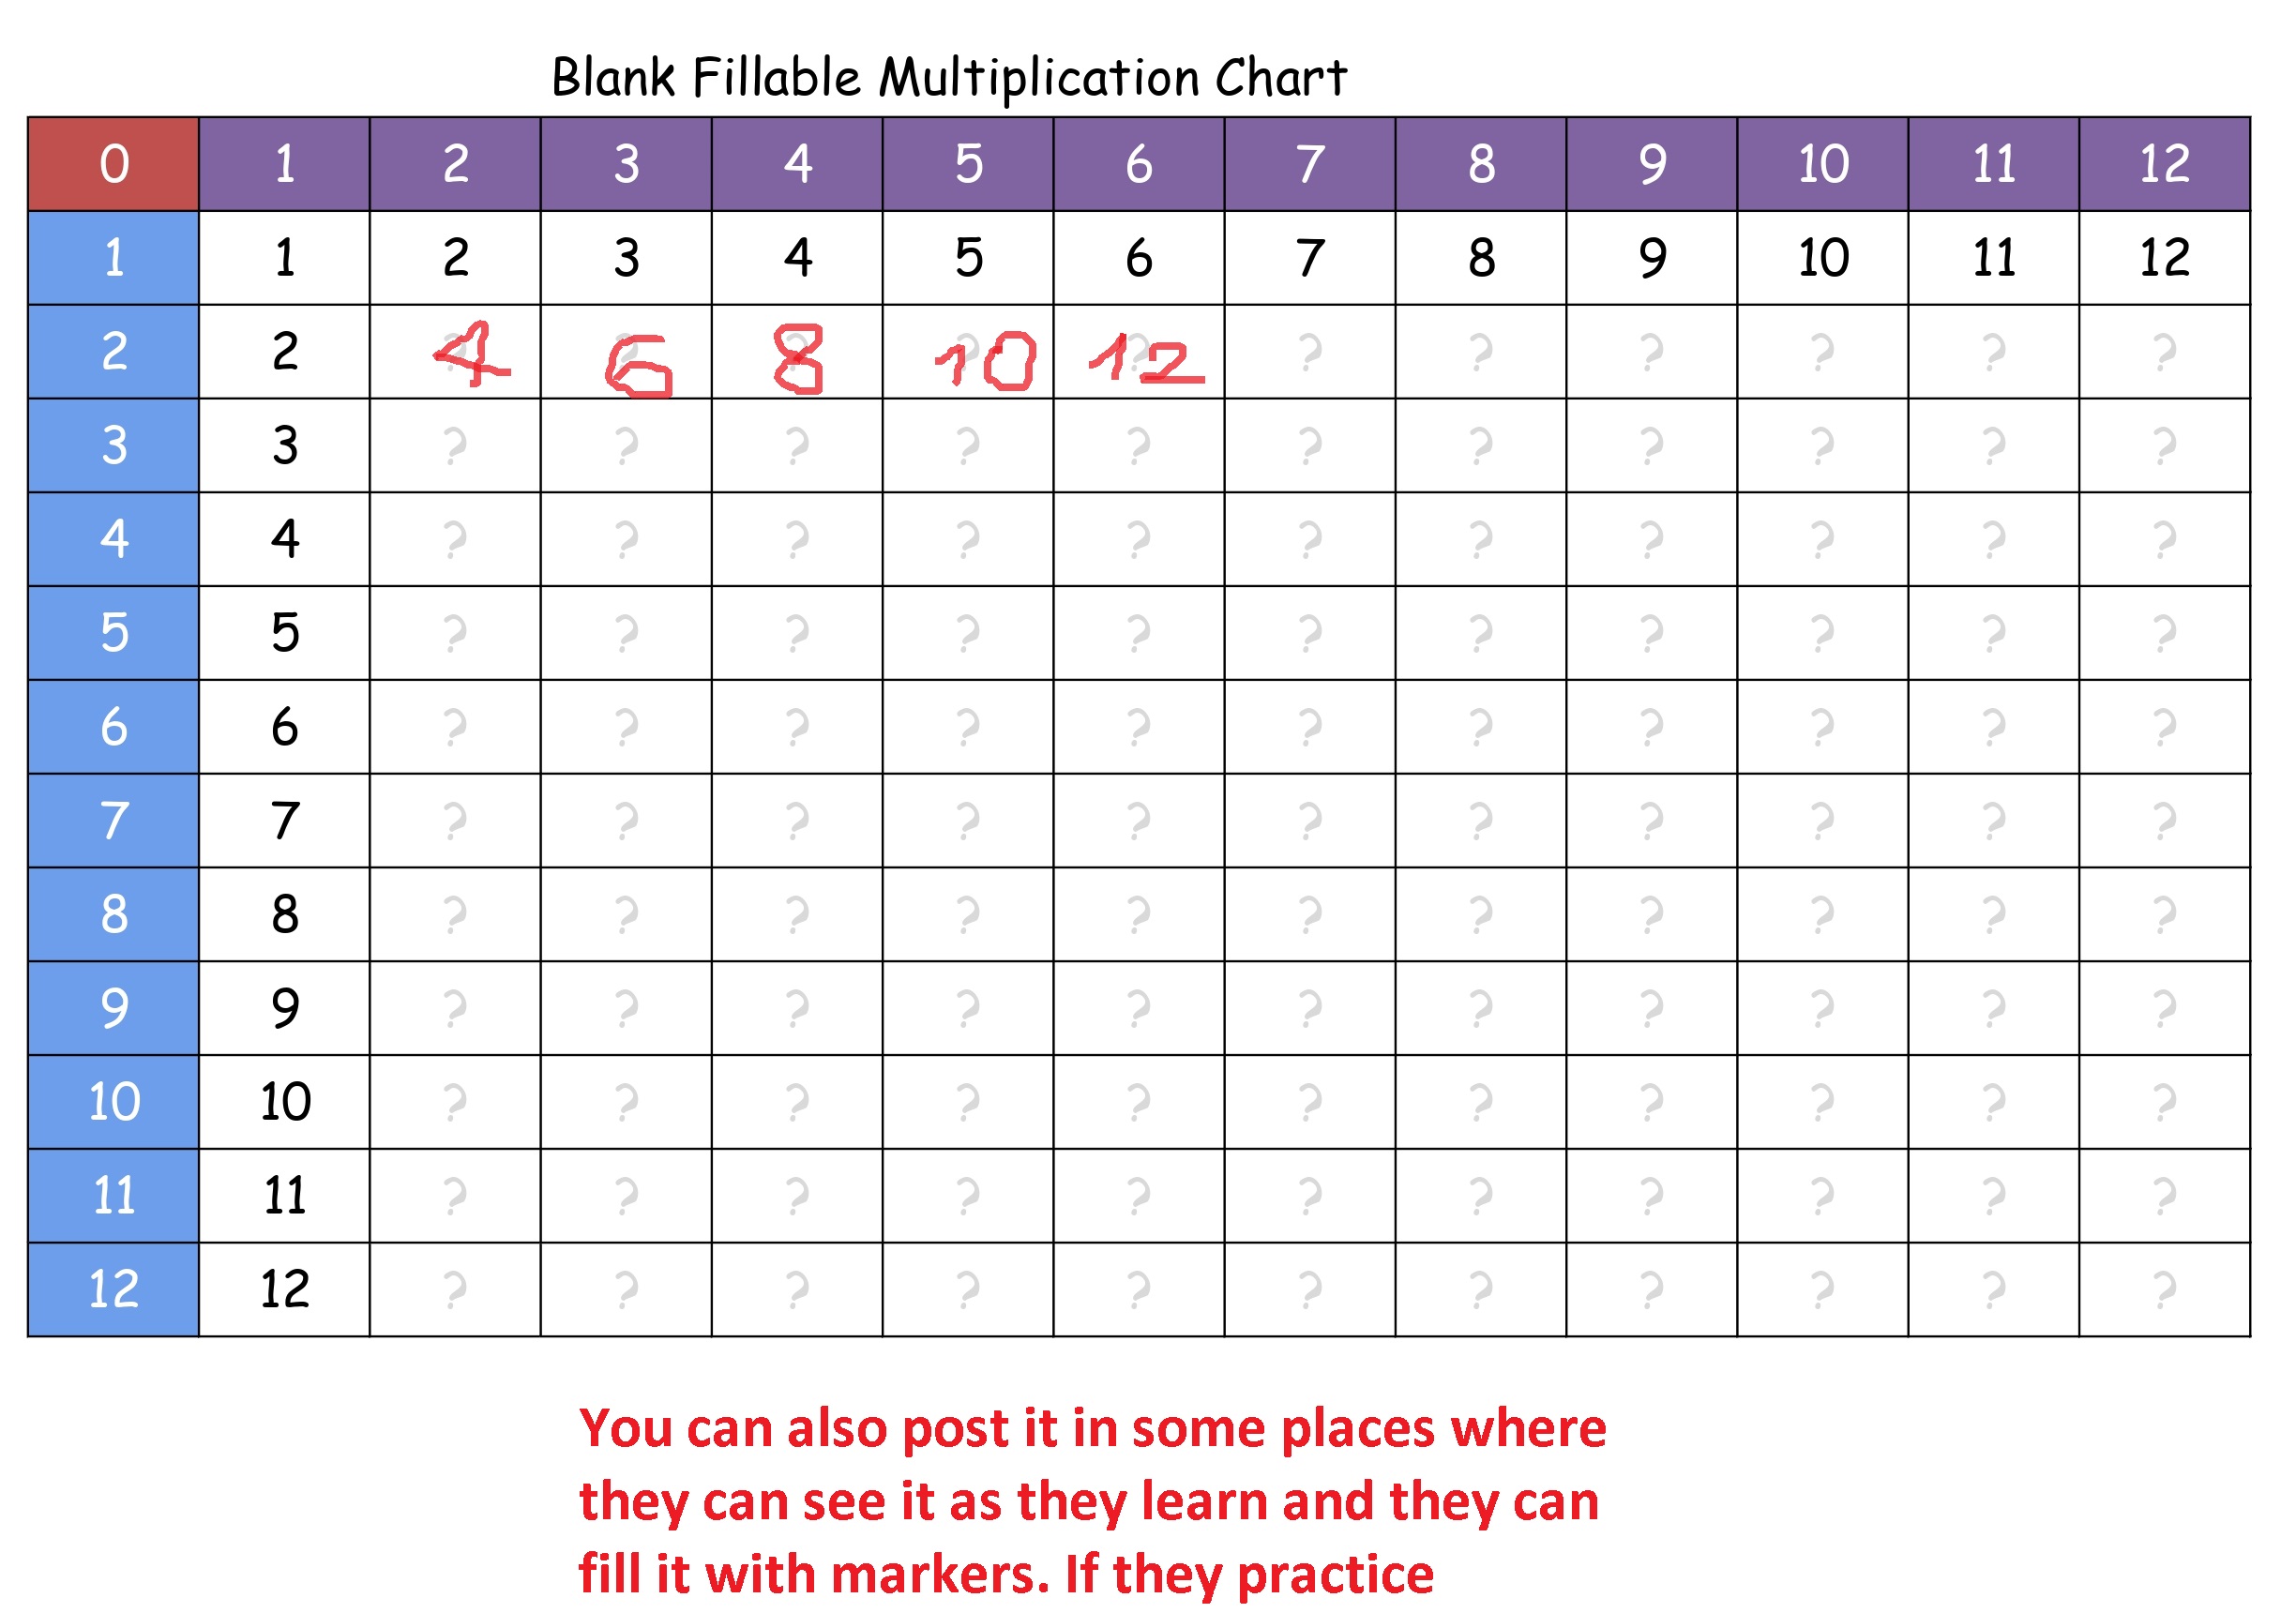 blank fillable multiplication chart explanation